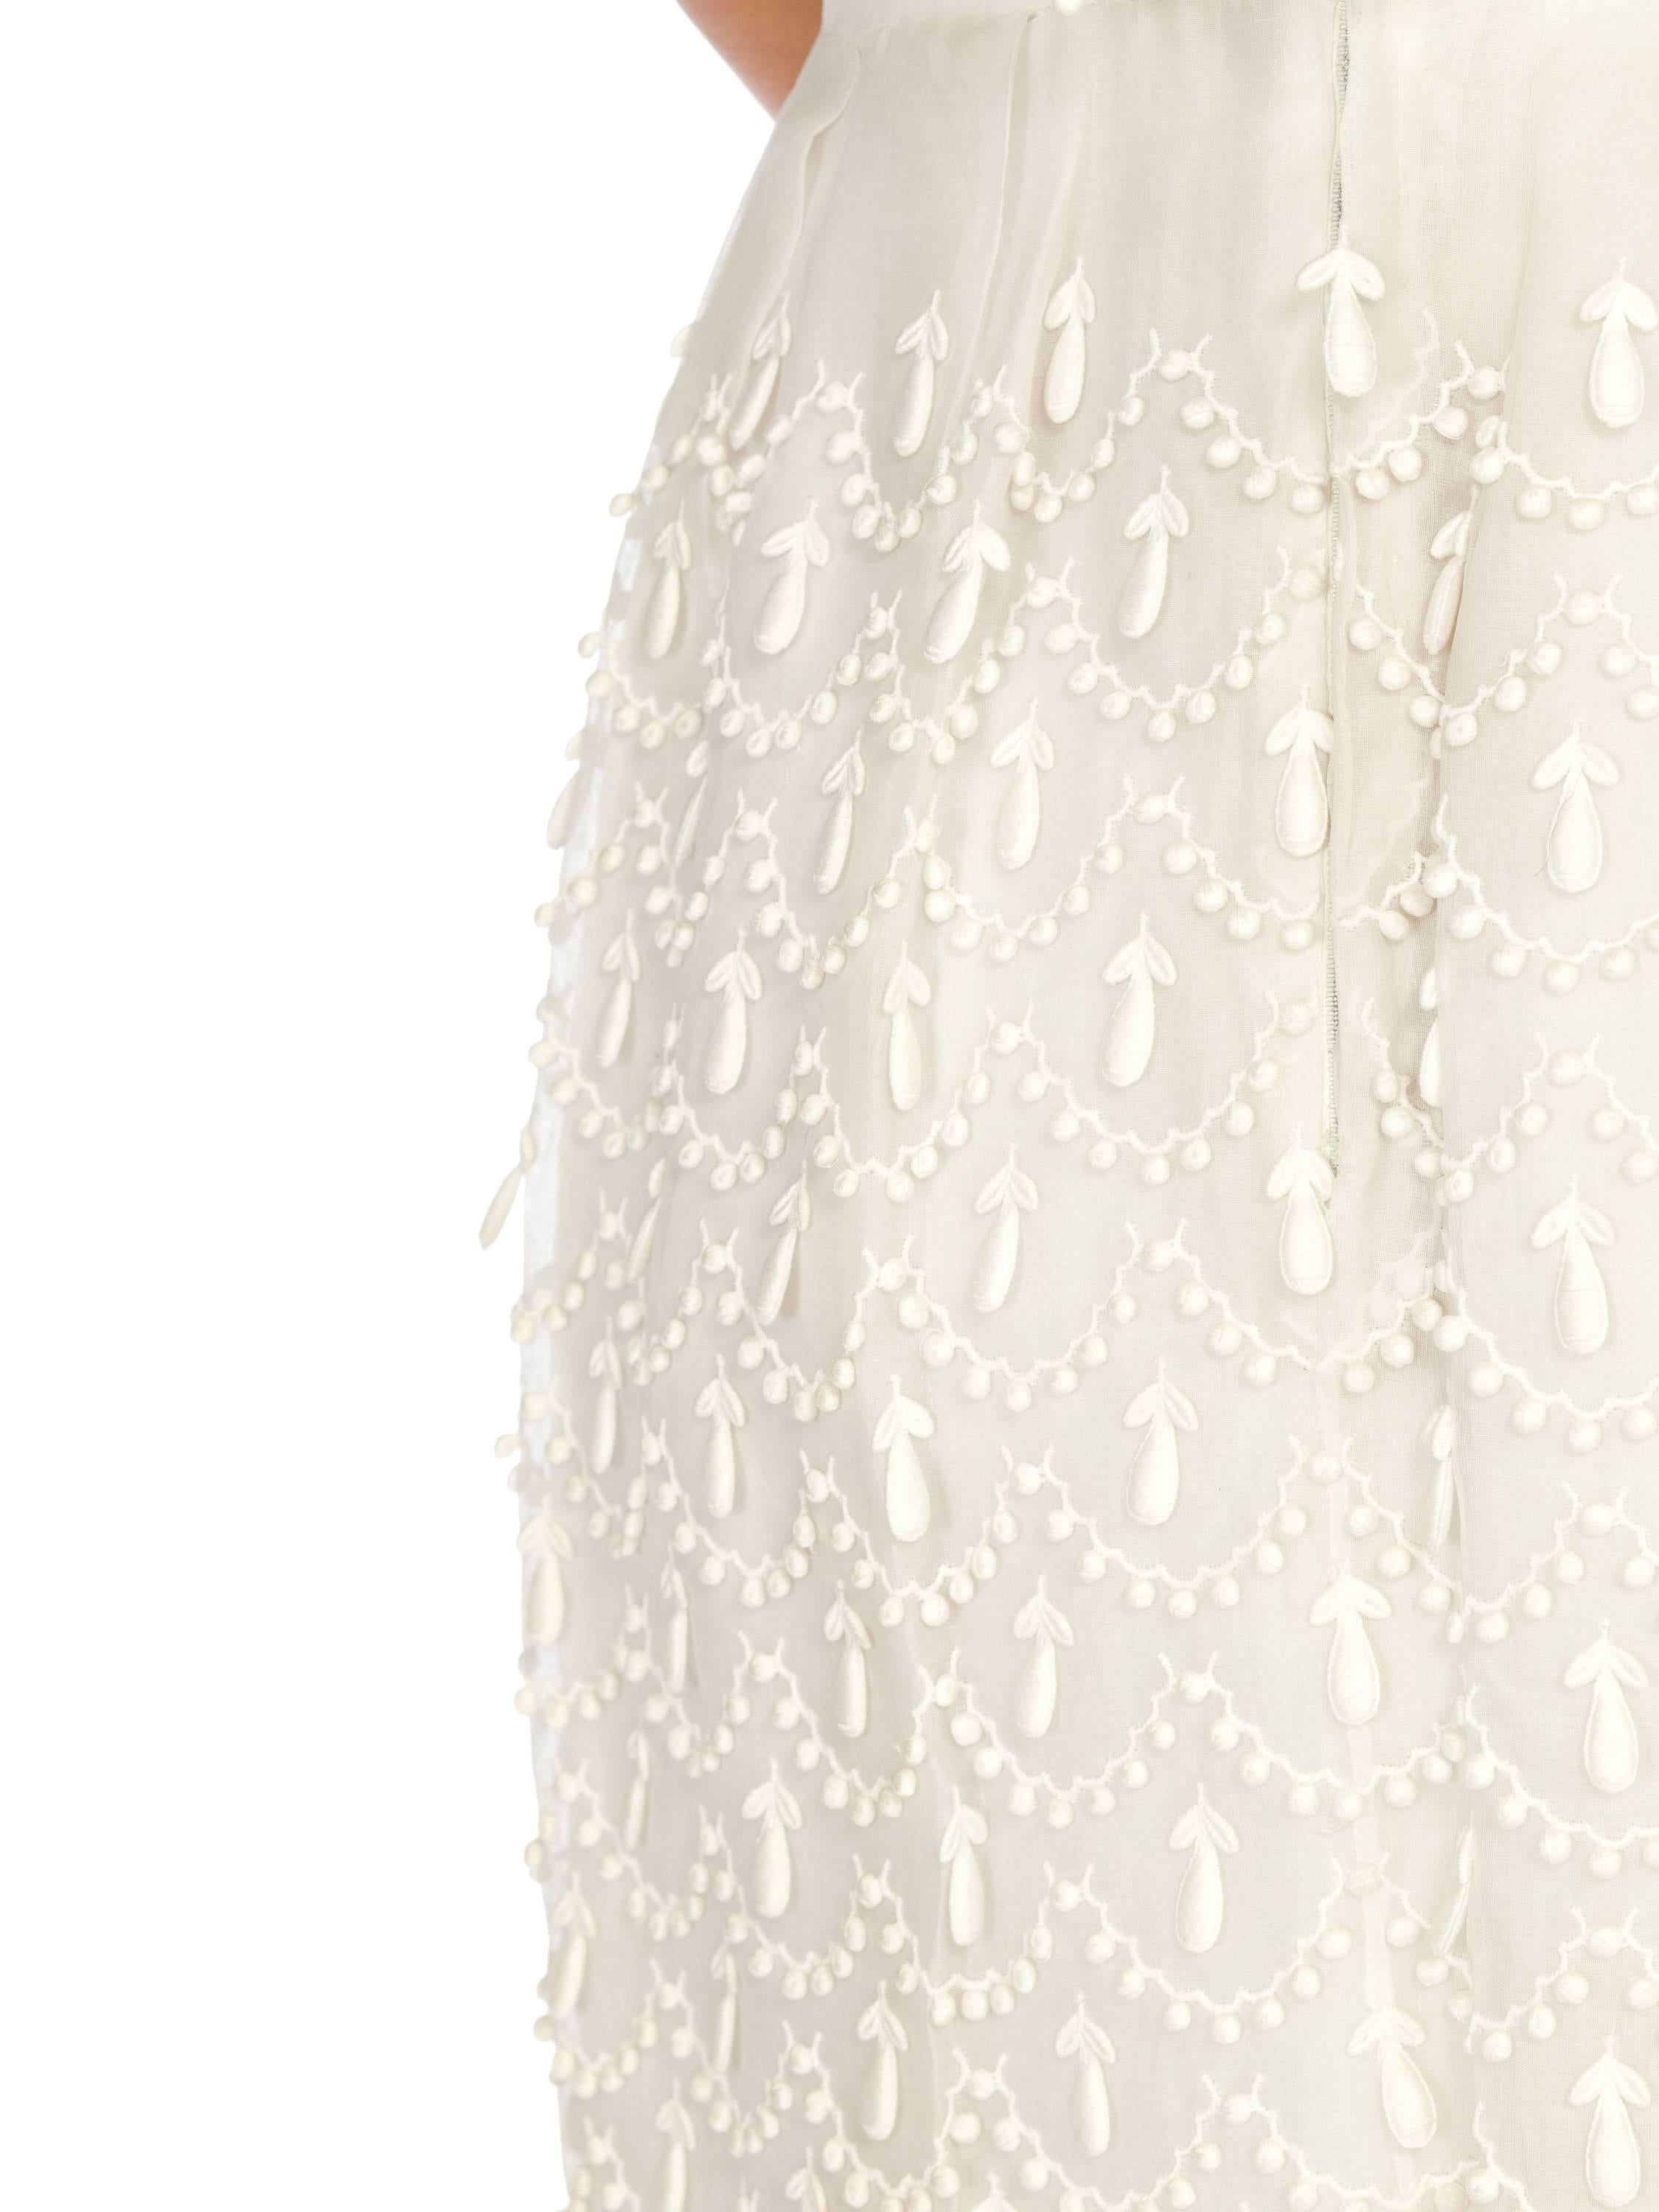 1960s Courreges Haute Couture Embroidered White Lace Dress 3